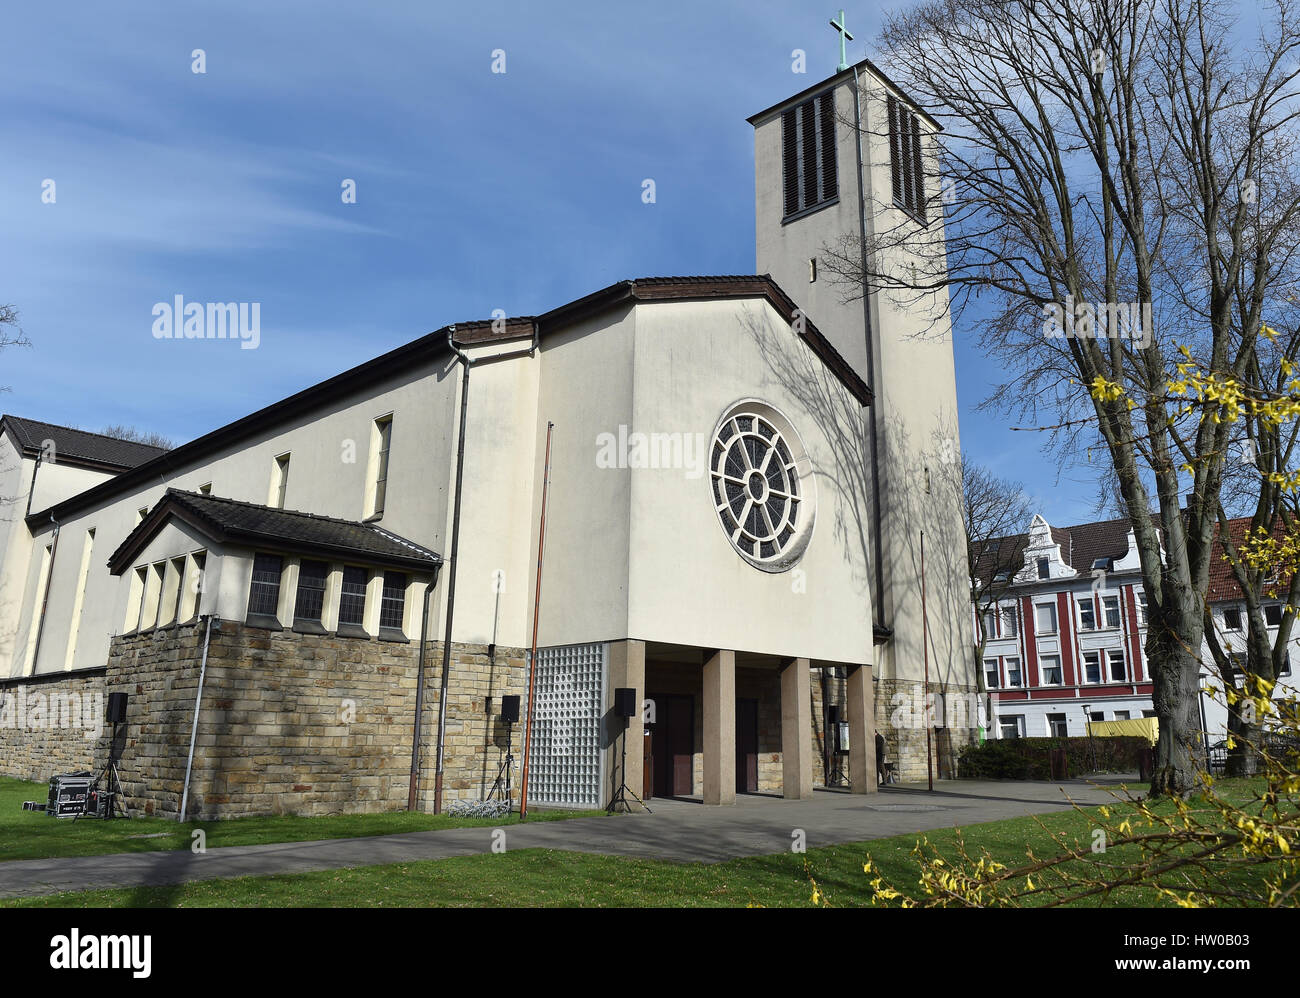 Herne, Germany. 15th Mar, 2017. The Sacred Heart Church (Herz-Jesu-Kirche) in which an ecumenical memorial service is to take place for the two murder victims in Herne, Germany, 15 March 2017, Relatives, friends, neighbours and classmates are expected to attend the commemorative event. Photo: Caroline Seidel/dpa/Alamy Live News Stock Photo